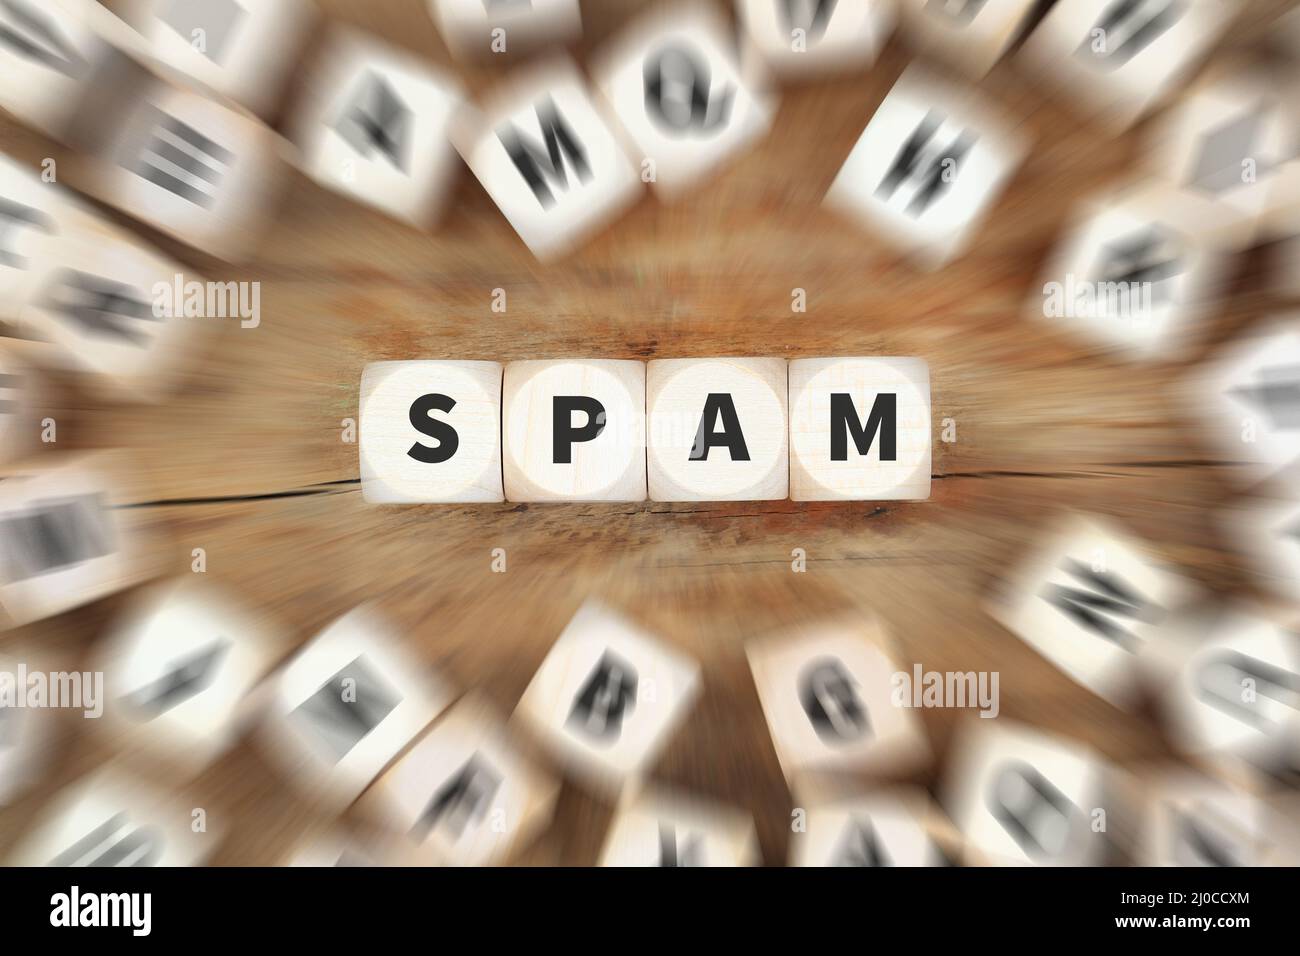 Spam Mail Letter Spam Mail Cubo Business Concept Foto Stock